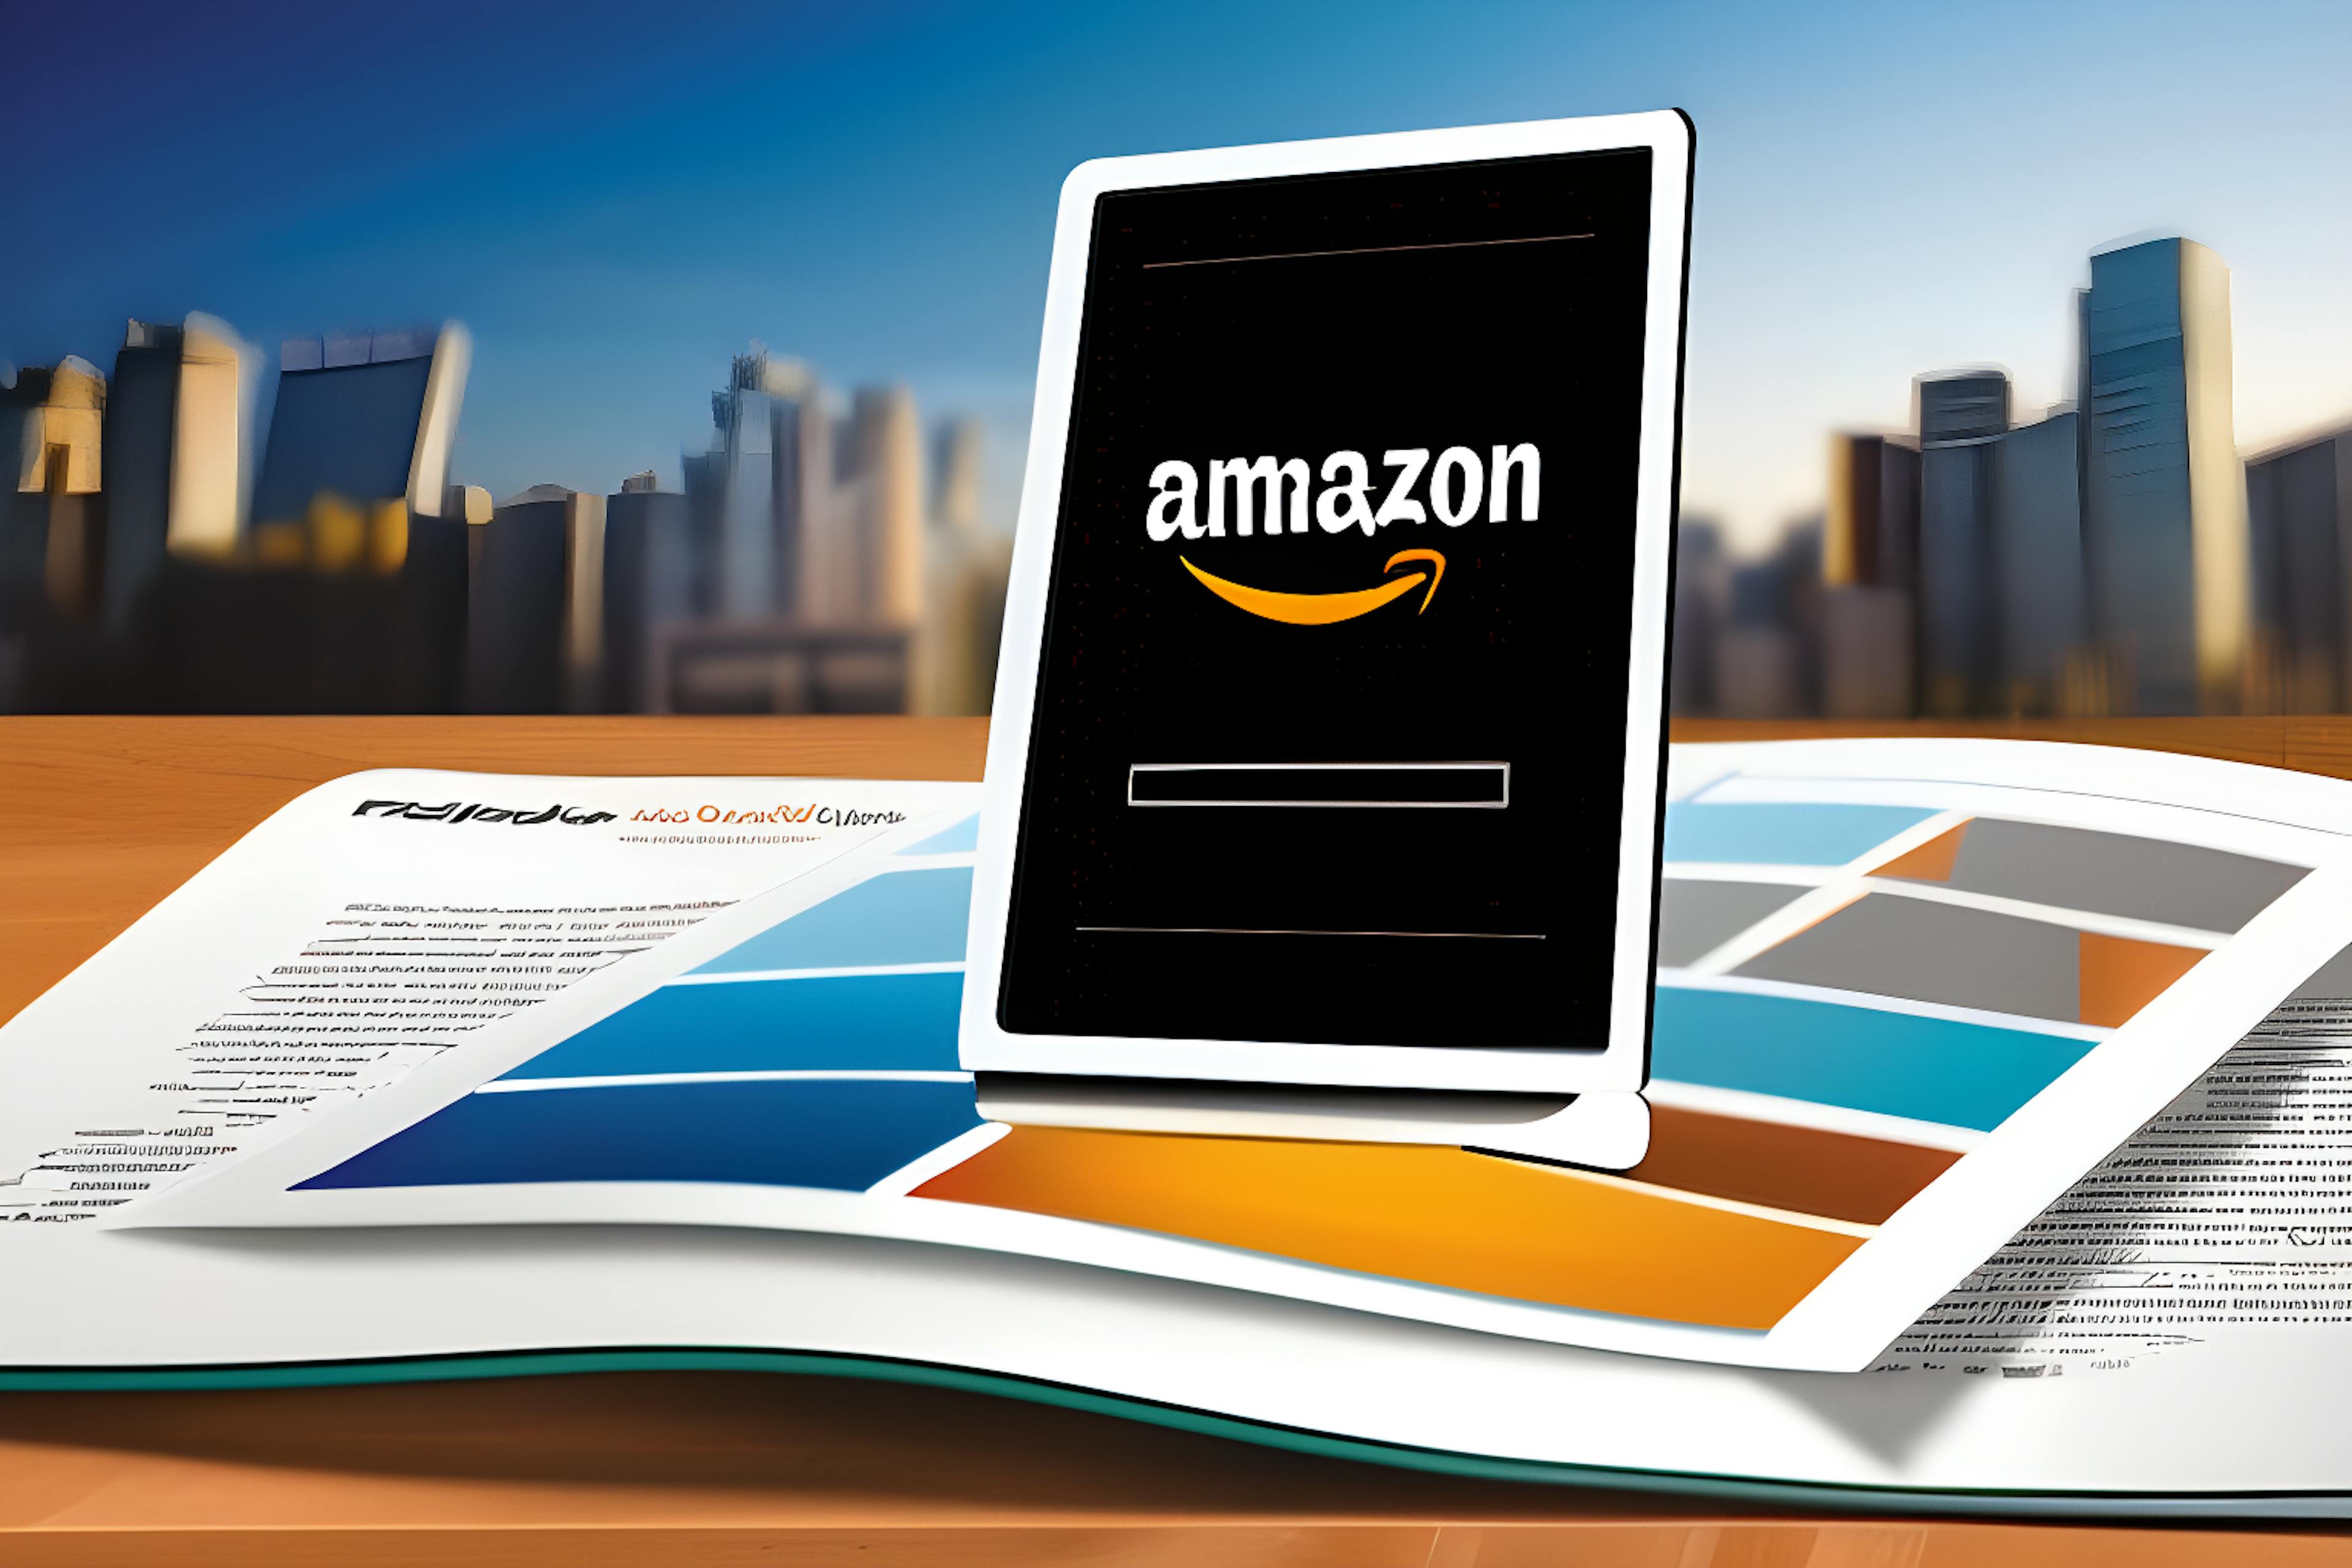 featured image - No Discounts Allowed: Reviewing Amazon's Price Control Playbook 